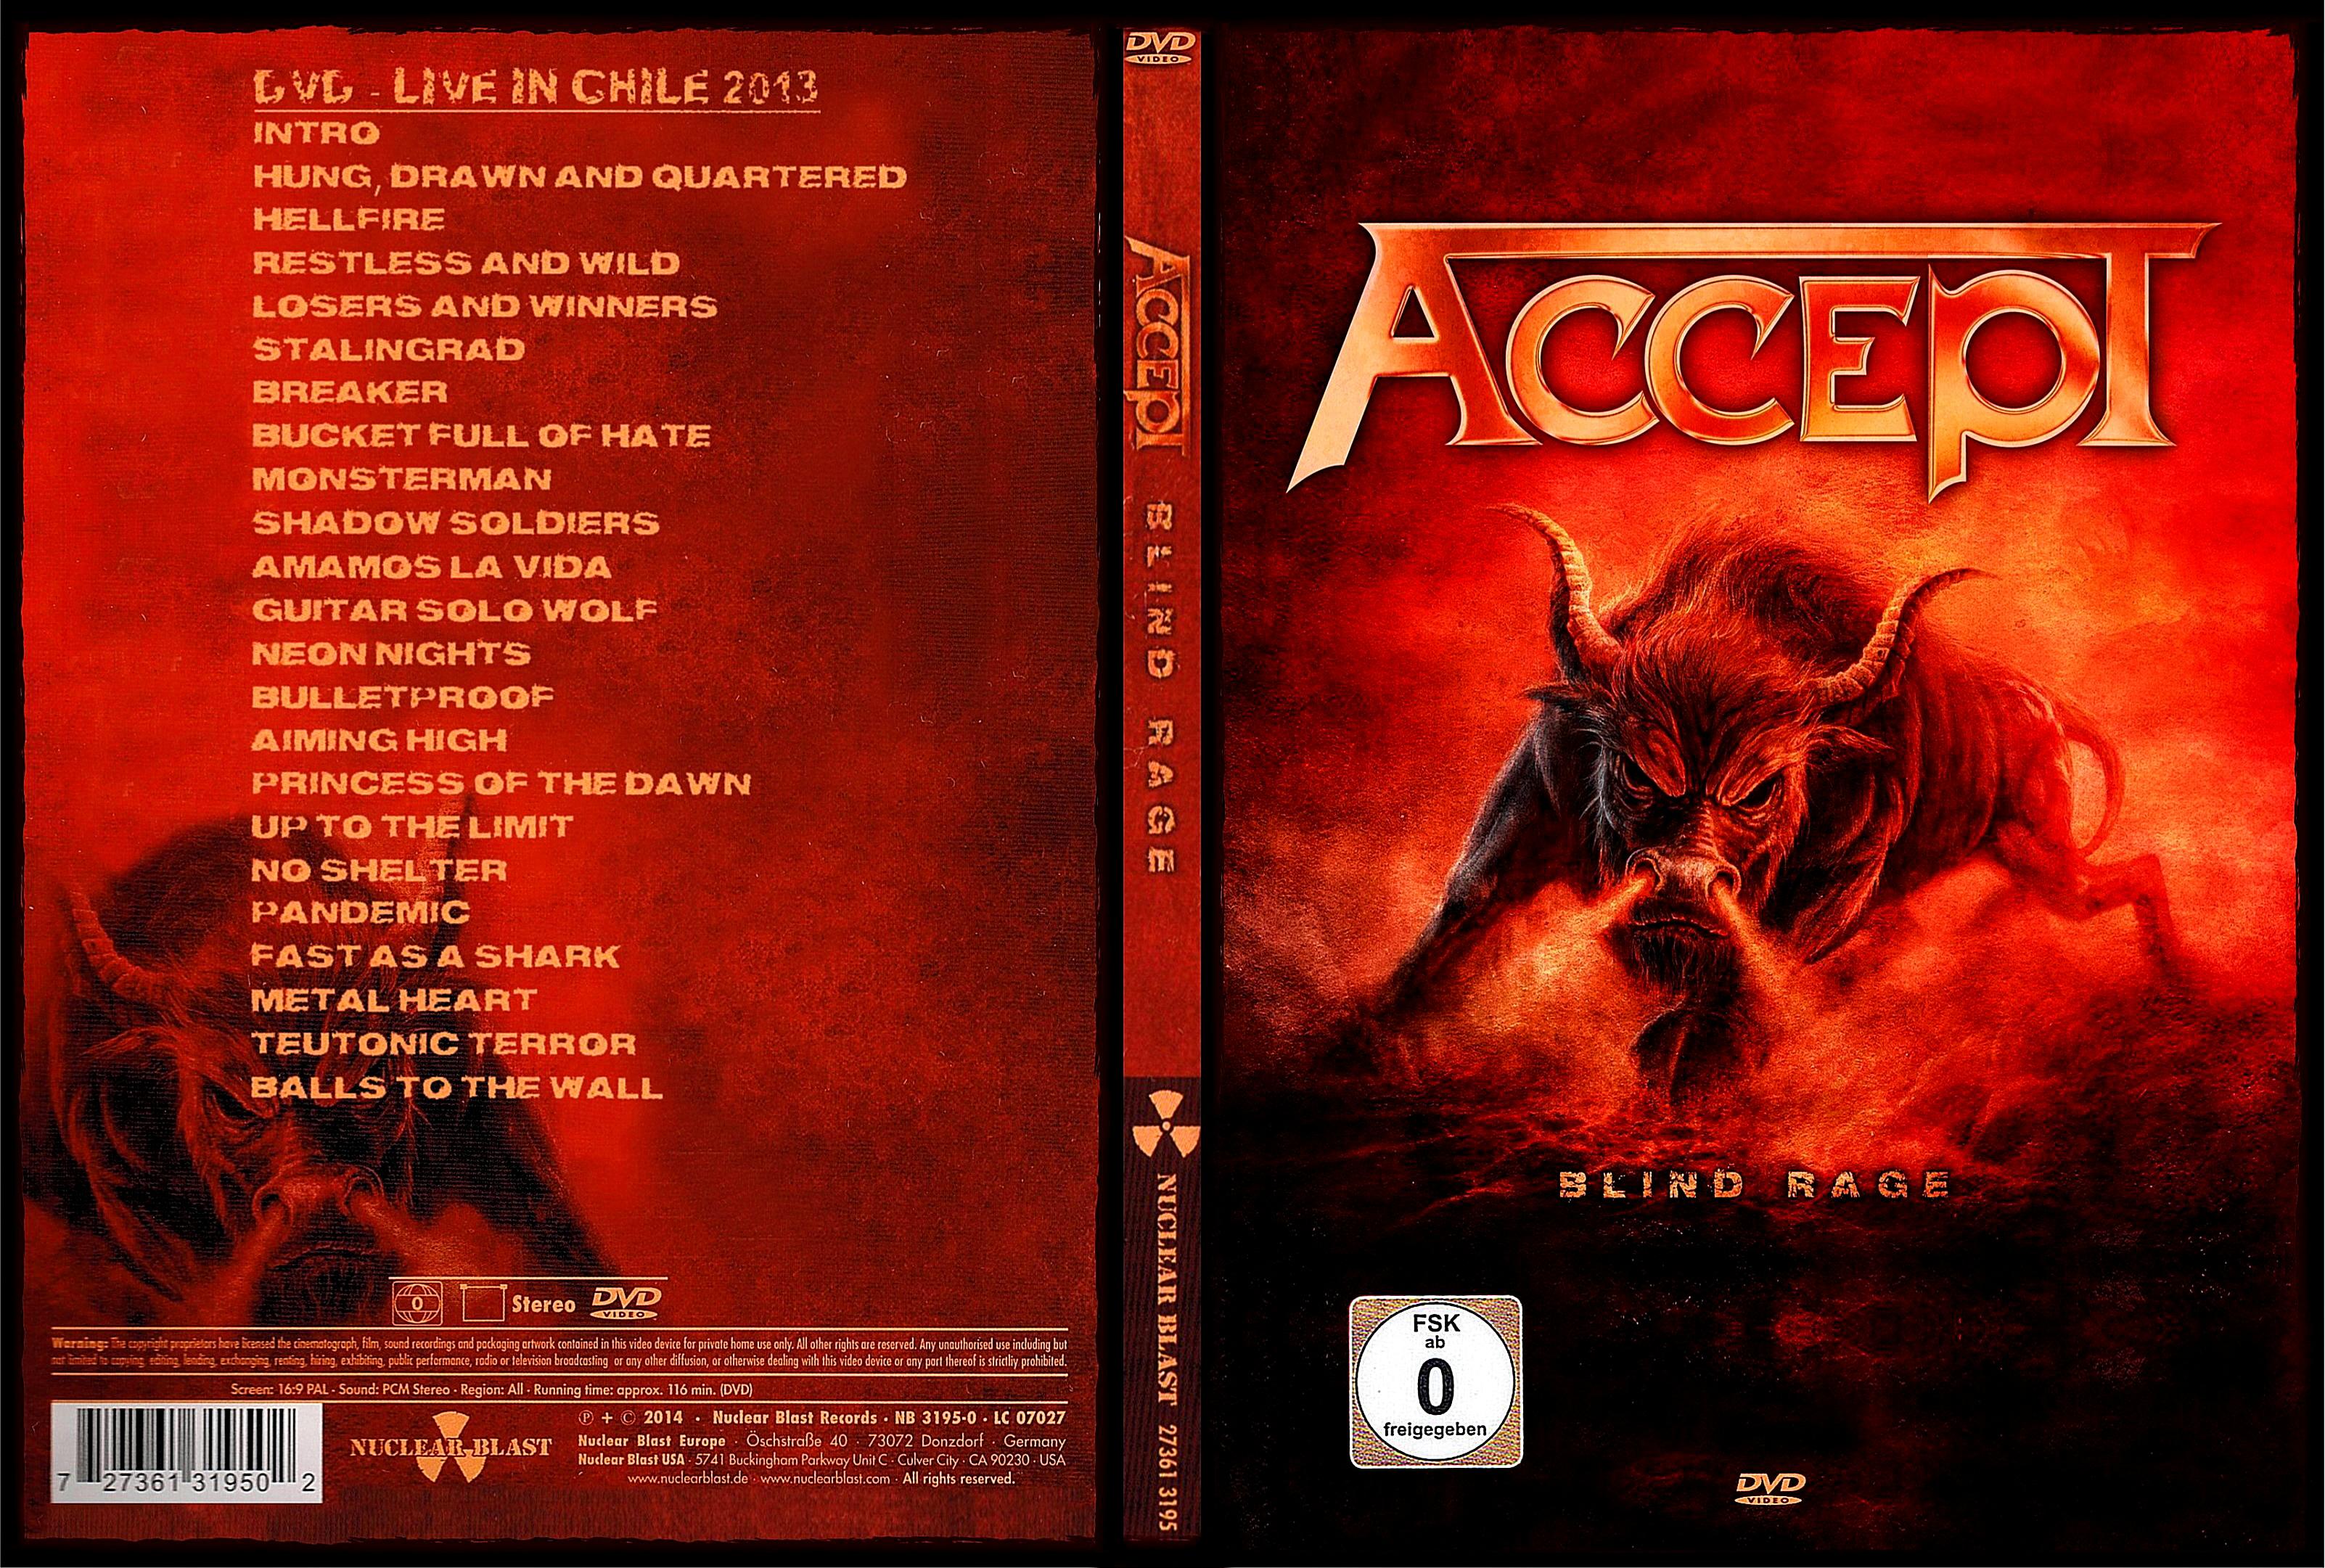 Accept humanoid. Accept -Blind Rage - Live in Chile (2013). Accept Blind Rage 2014. Accept_Live_in_Chile_2013. Accept 1996.